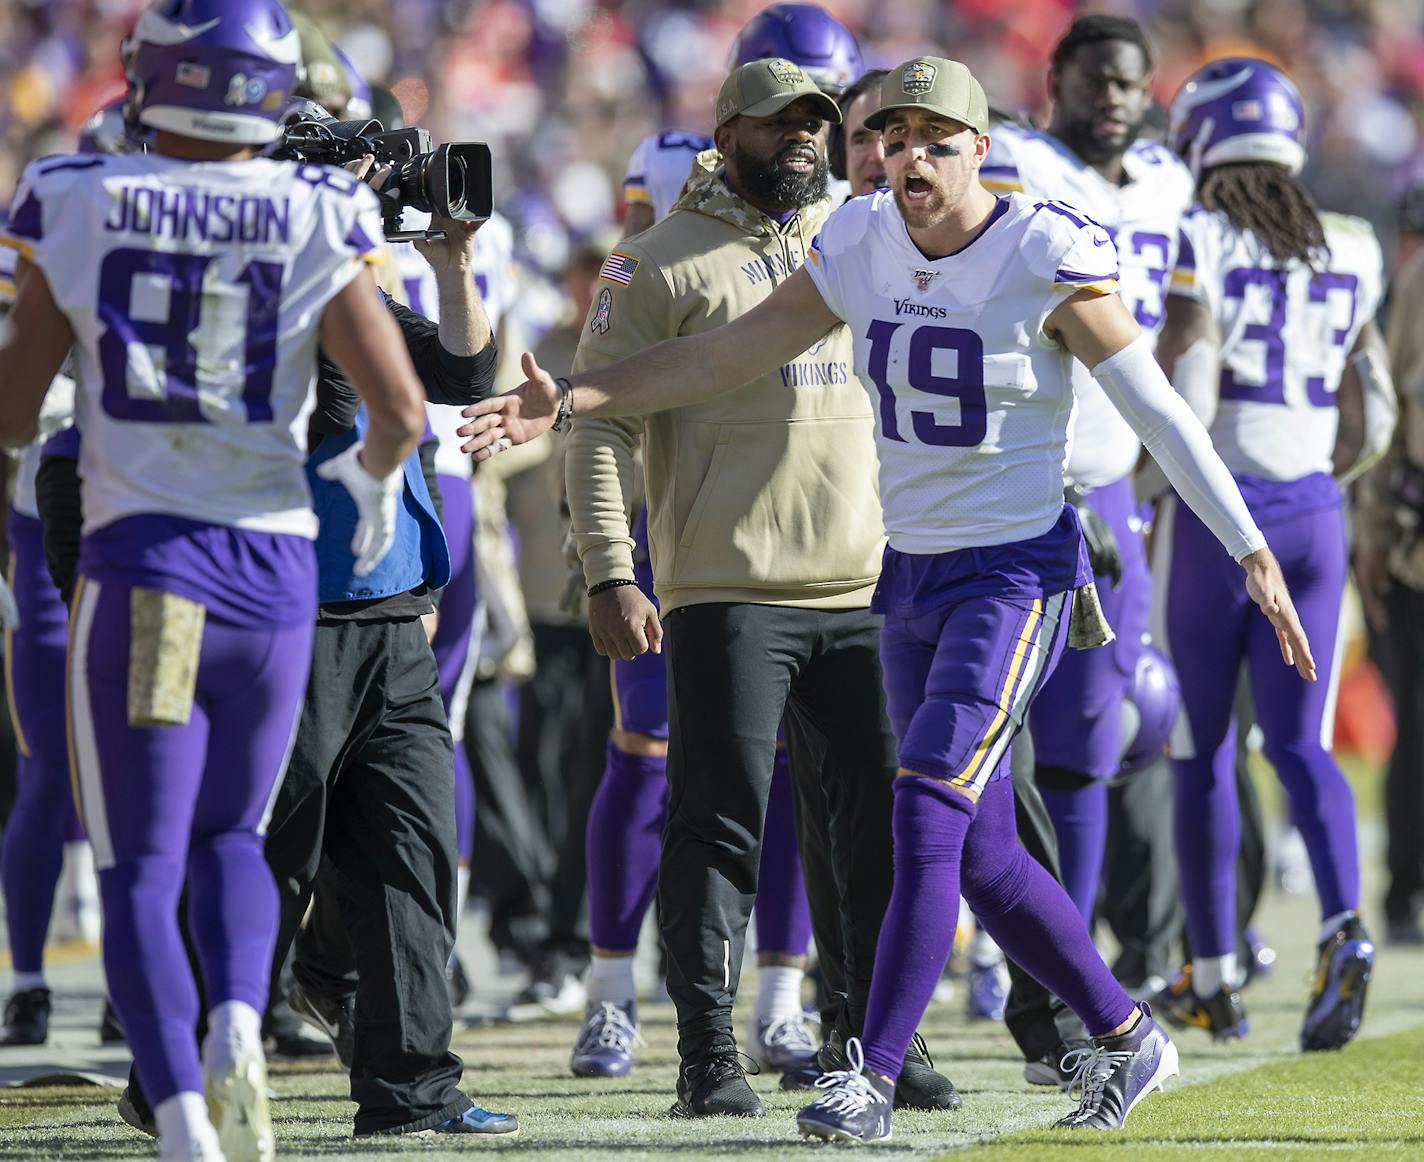 Vikings wide receiver Adam Thielen celebrated from the sideline with wide receiver Bisi Johnson after his touchdown in the fourth quarter. ] ELIZABETH FLORES &#x2022; liz.flores@startribune.com Vikings at Kansas City Chiefs at Arrowhead Stadium, Sunday, November 3, 2019 in Kansas City, MO.